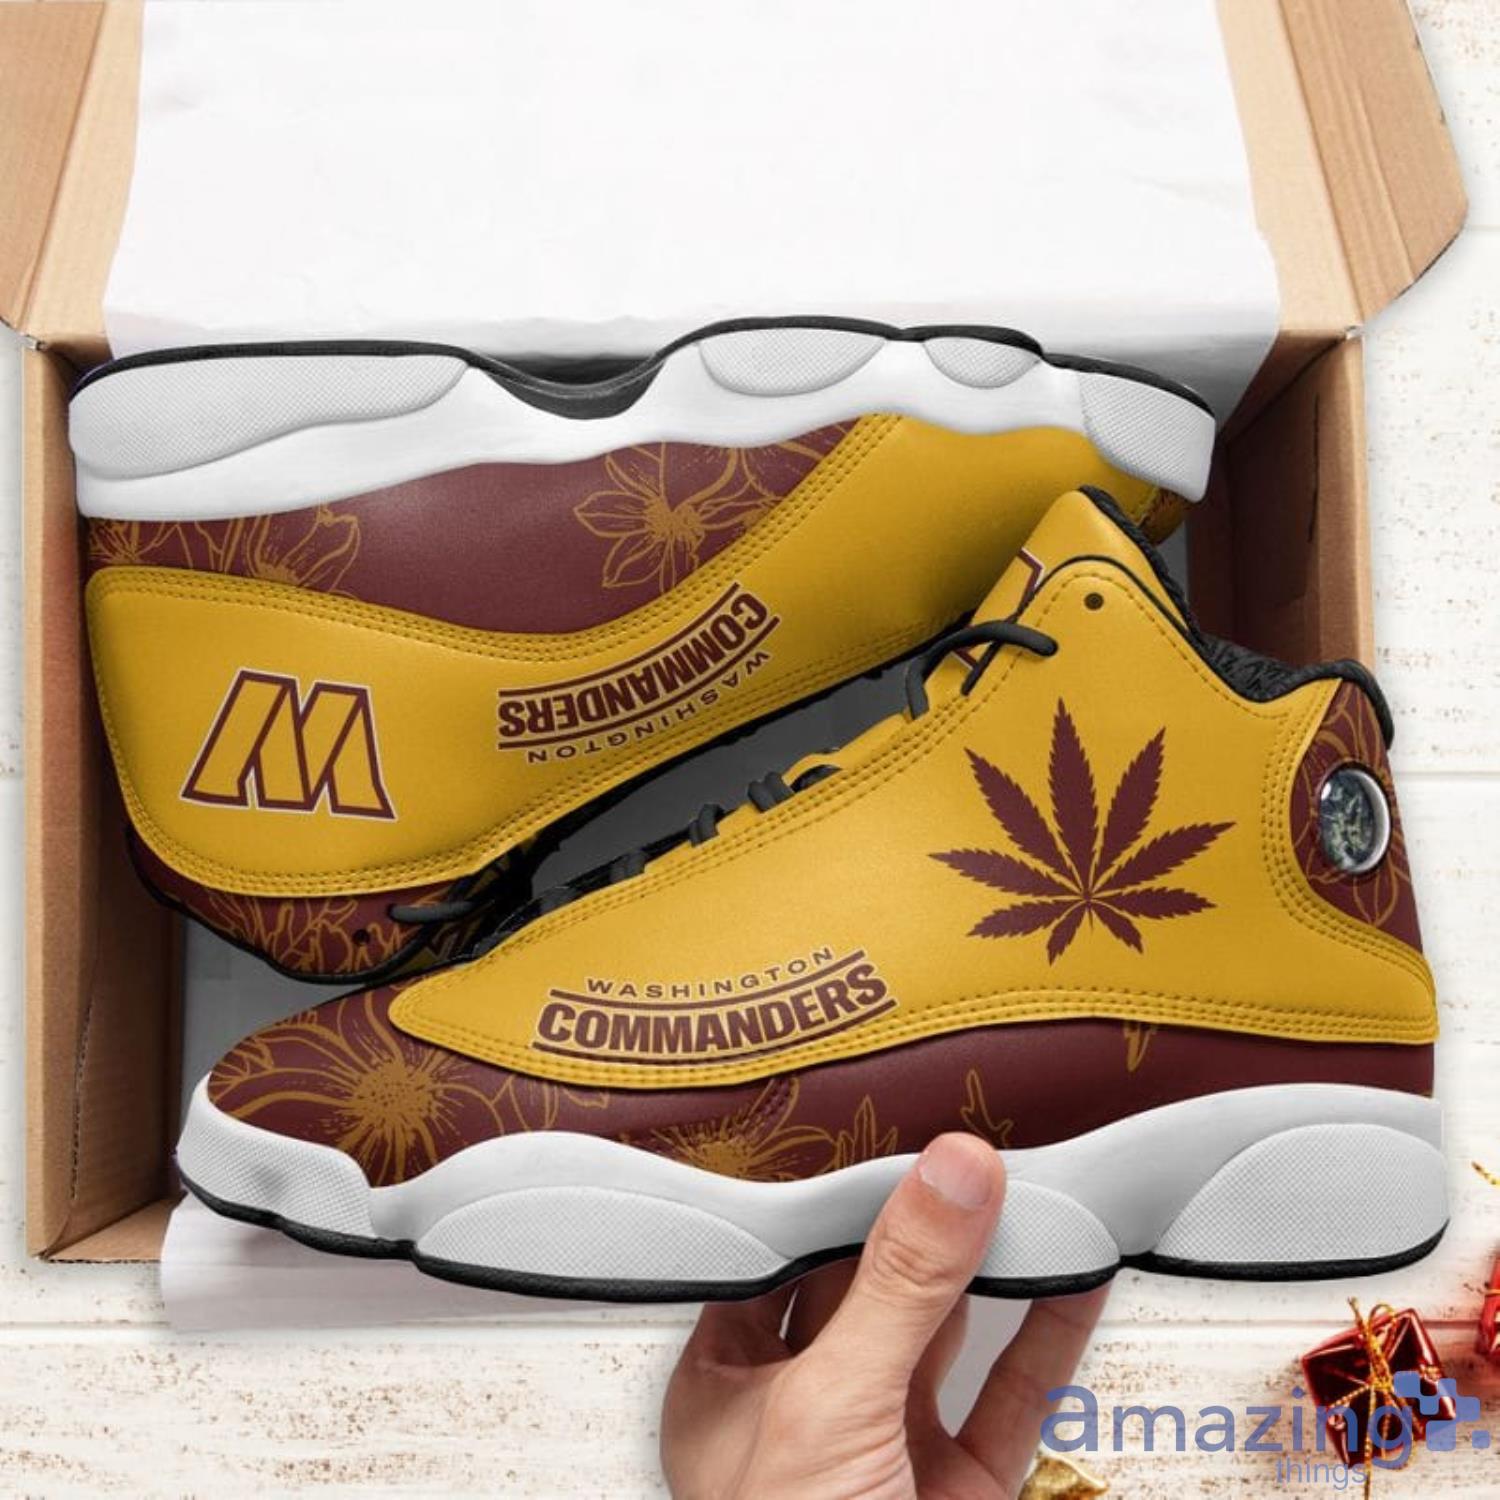 Washington Commanders Weed Air Jordan 13 Shoes For Fans